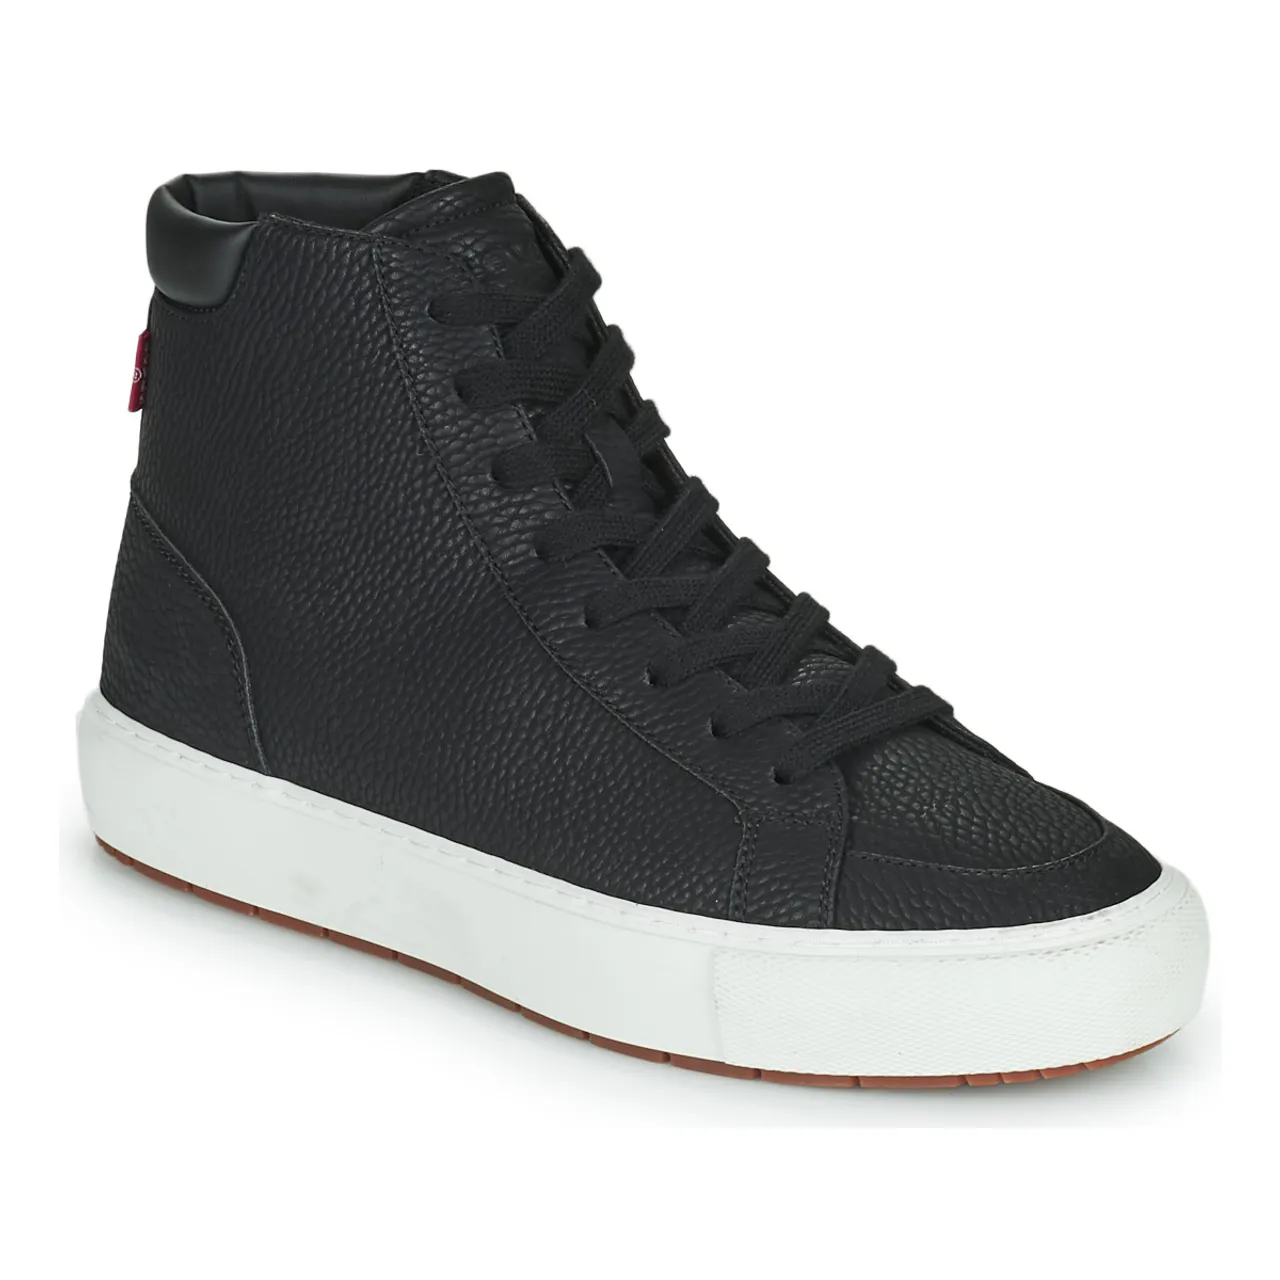 Levis  WOODWARD CHUKKA  men's Shoes (High-top Trainers) in Black